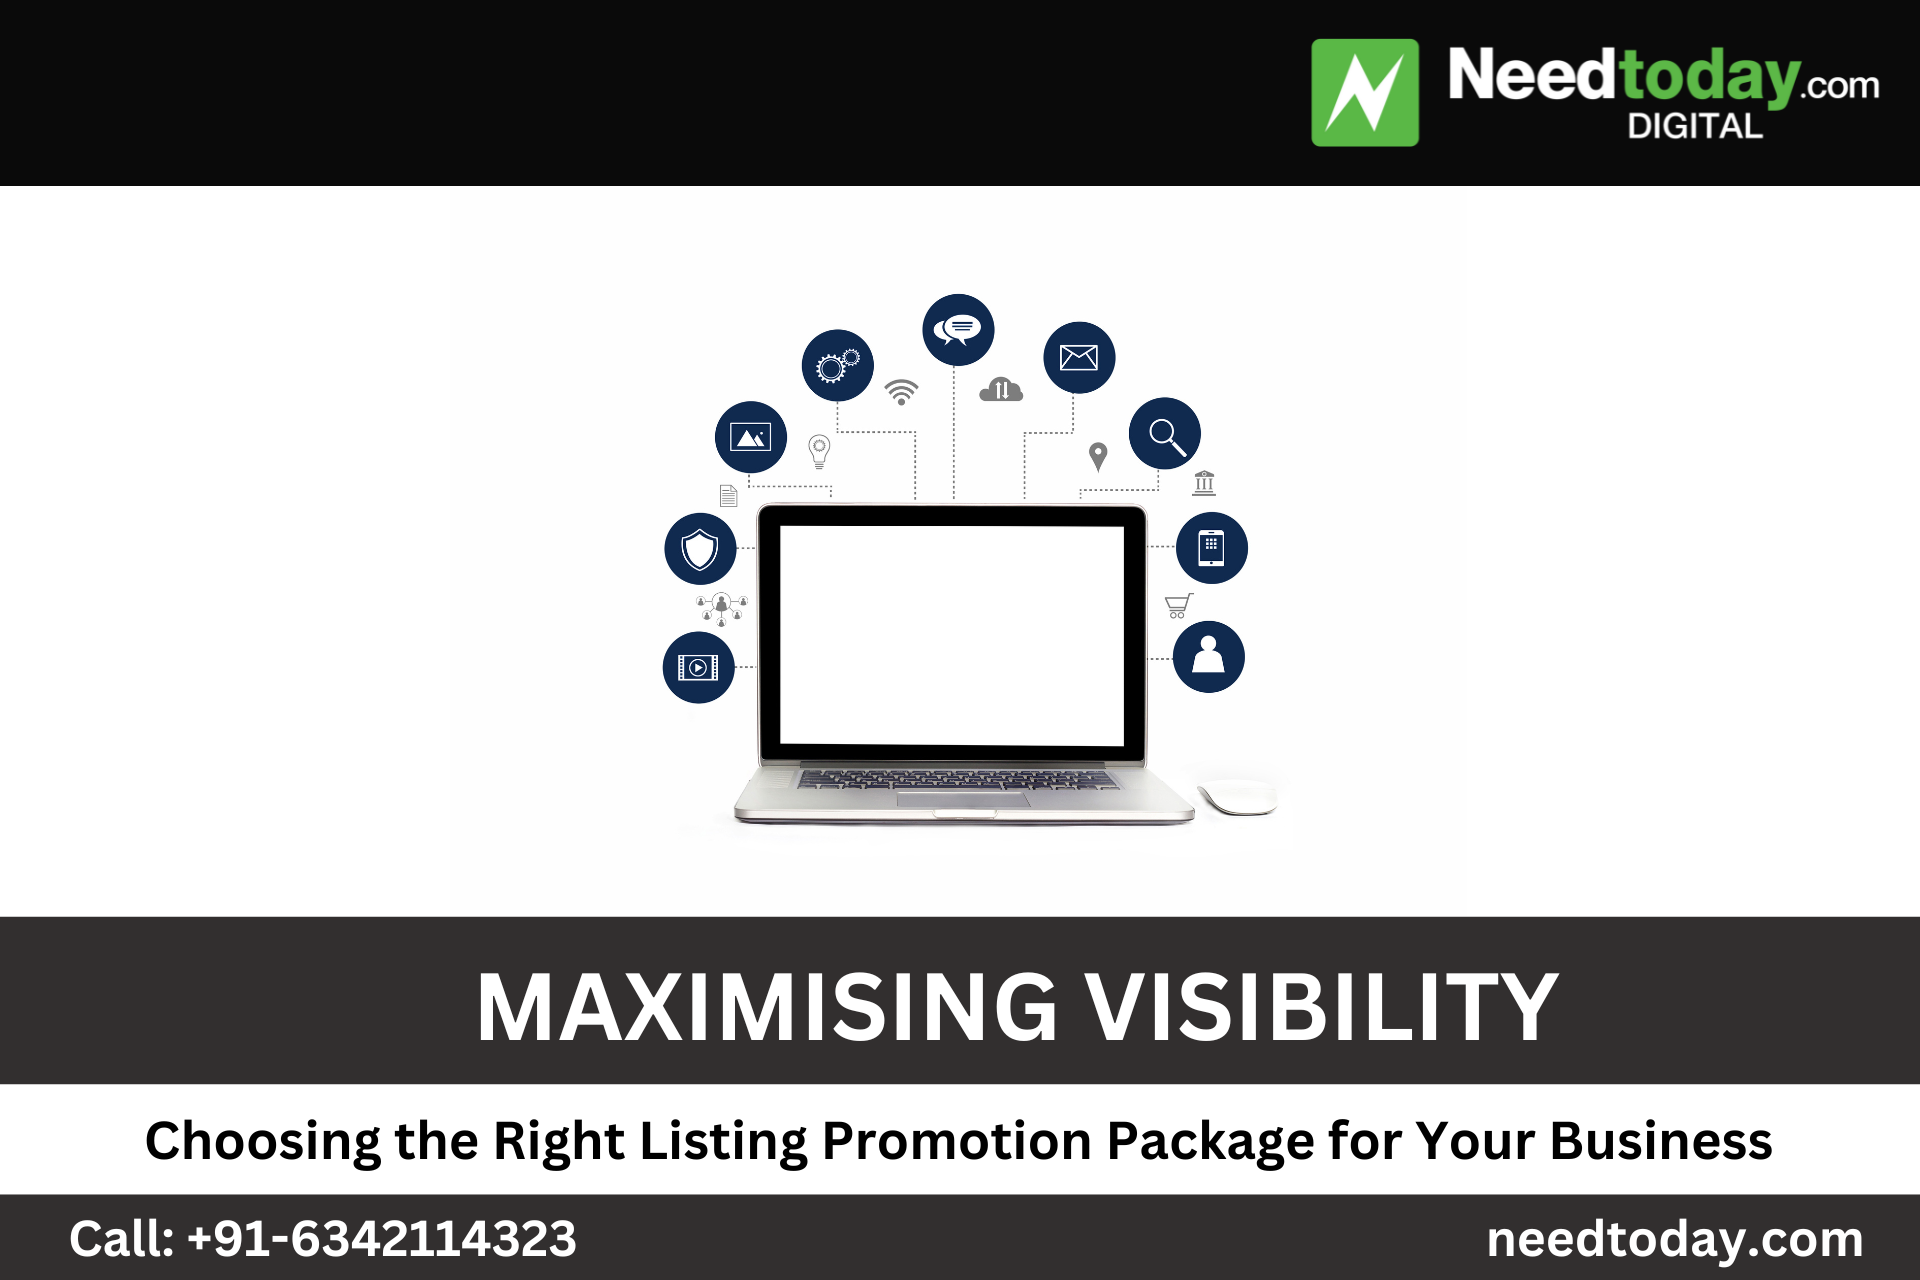 Maximizing Visibility: Choosing the Right Listing Promotion Package for Your Business